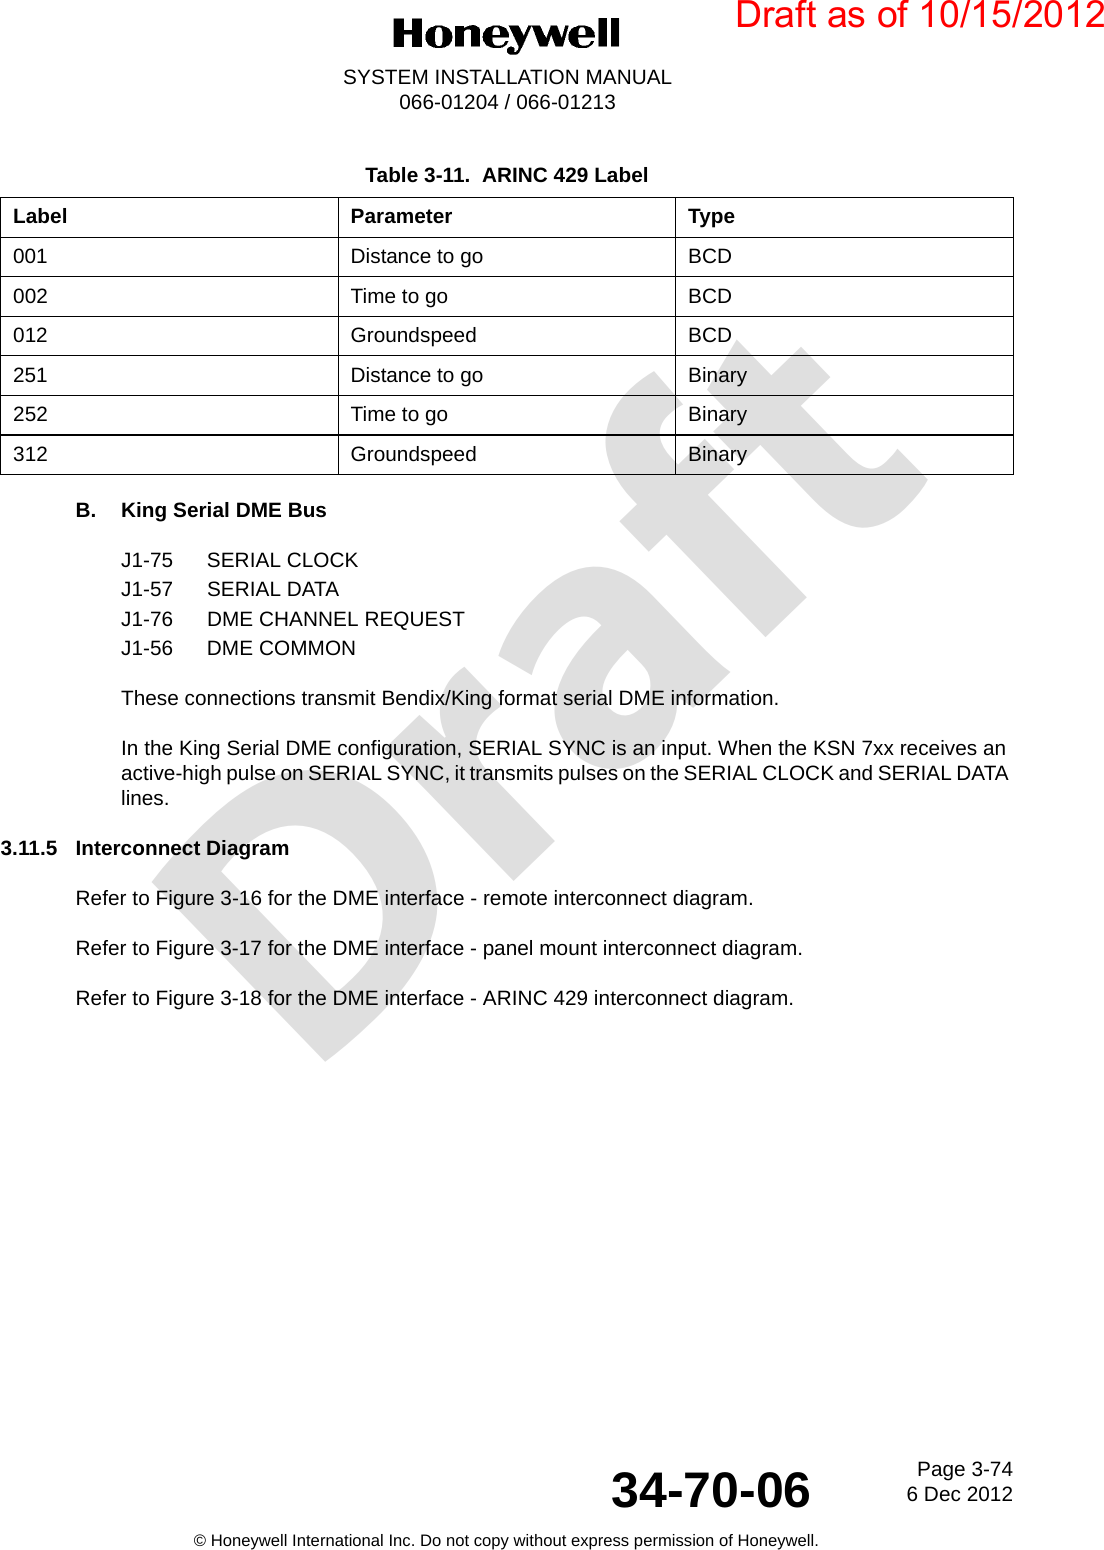 DraftPage 3-746 Dec 201234-70-06SYSTEM INSTALLATION MANUAL066-01204 / 066-01213© Honeywell International Inc. Do not copy without express permission of Honeywell.B. King Serial DME BusJ1-75 SERIAL CLOCKJ1-57 SERIAL DATAJ1-76 DME CHANNEL REQUESTJ1-56 DME COMMONThese connections transmit Bendix/King format serial DME information.In the King Serial DME configuration, SERIAL SYNC is an input. When the KSN 7xx receives an active-high pulse on SERIAL SYNC, it transmits pulses on the SERIAL CLOCK and SERIAL DATA lines.3.11.5 Interconnect DiagramRefer to Figure 3-16 for the DME interface - remote interconnect diagram.Refer to Figure 3-17 for the DME interface - panel mount interconnect diagram.Refer to Figure 3-18 for the DME interface - ARINC 429 interconnect diagram.Table 3-11.  ARINC 429 LabelLabel Parameter Type001 Distance to go BCD002 Time to go BCD012 Groundspeed BCD251 Distance to go Binary252 Time to go Binary312 Groundspeed BinaryDraft as of 10/15/2012